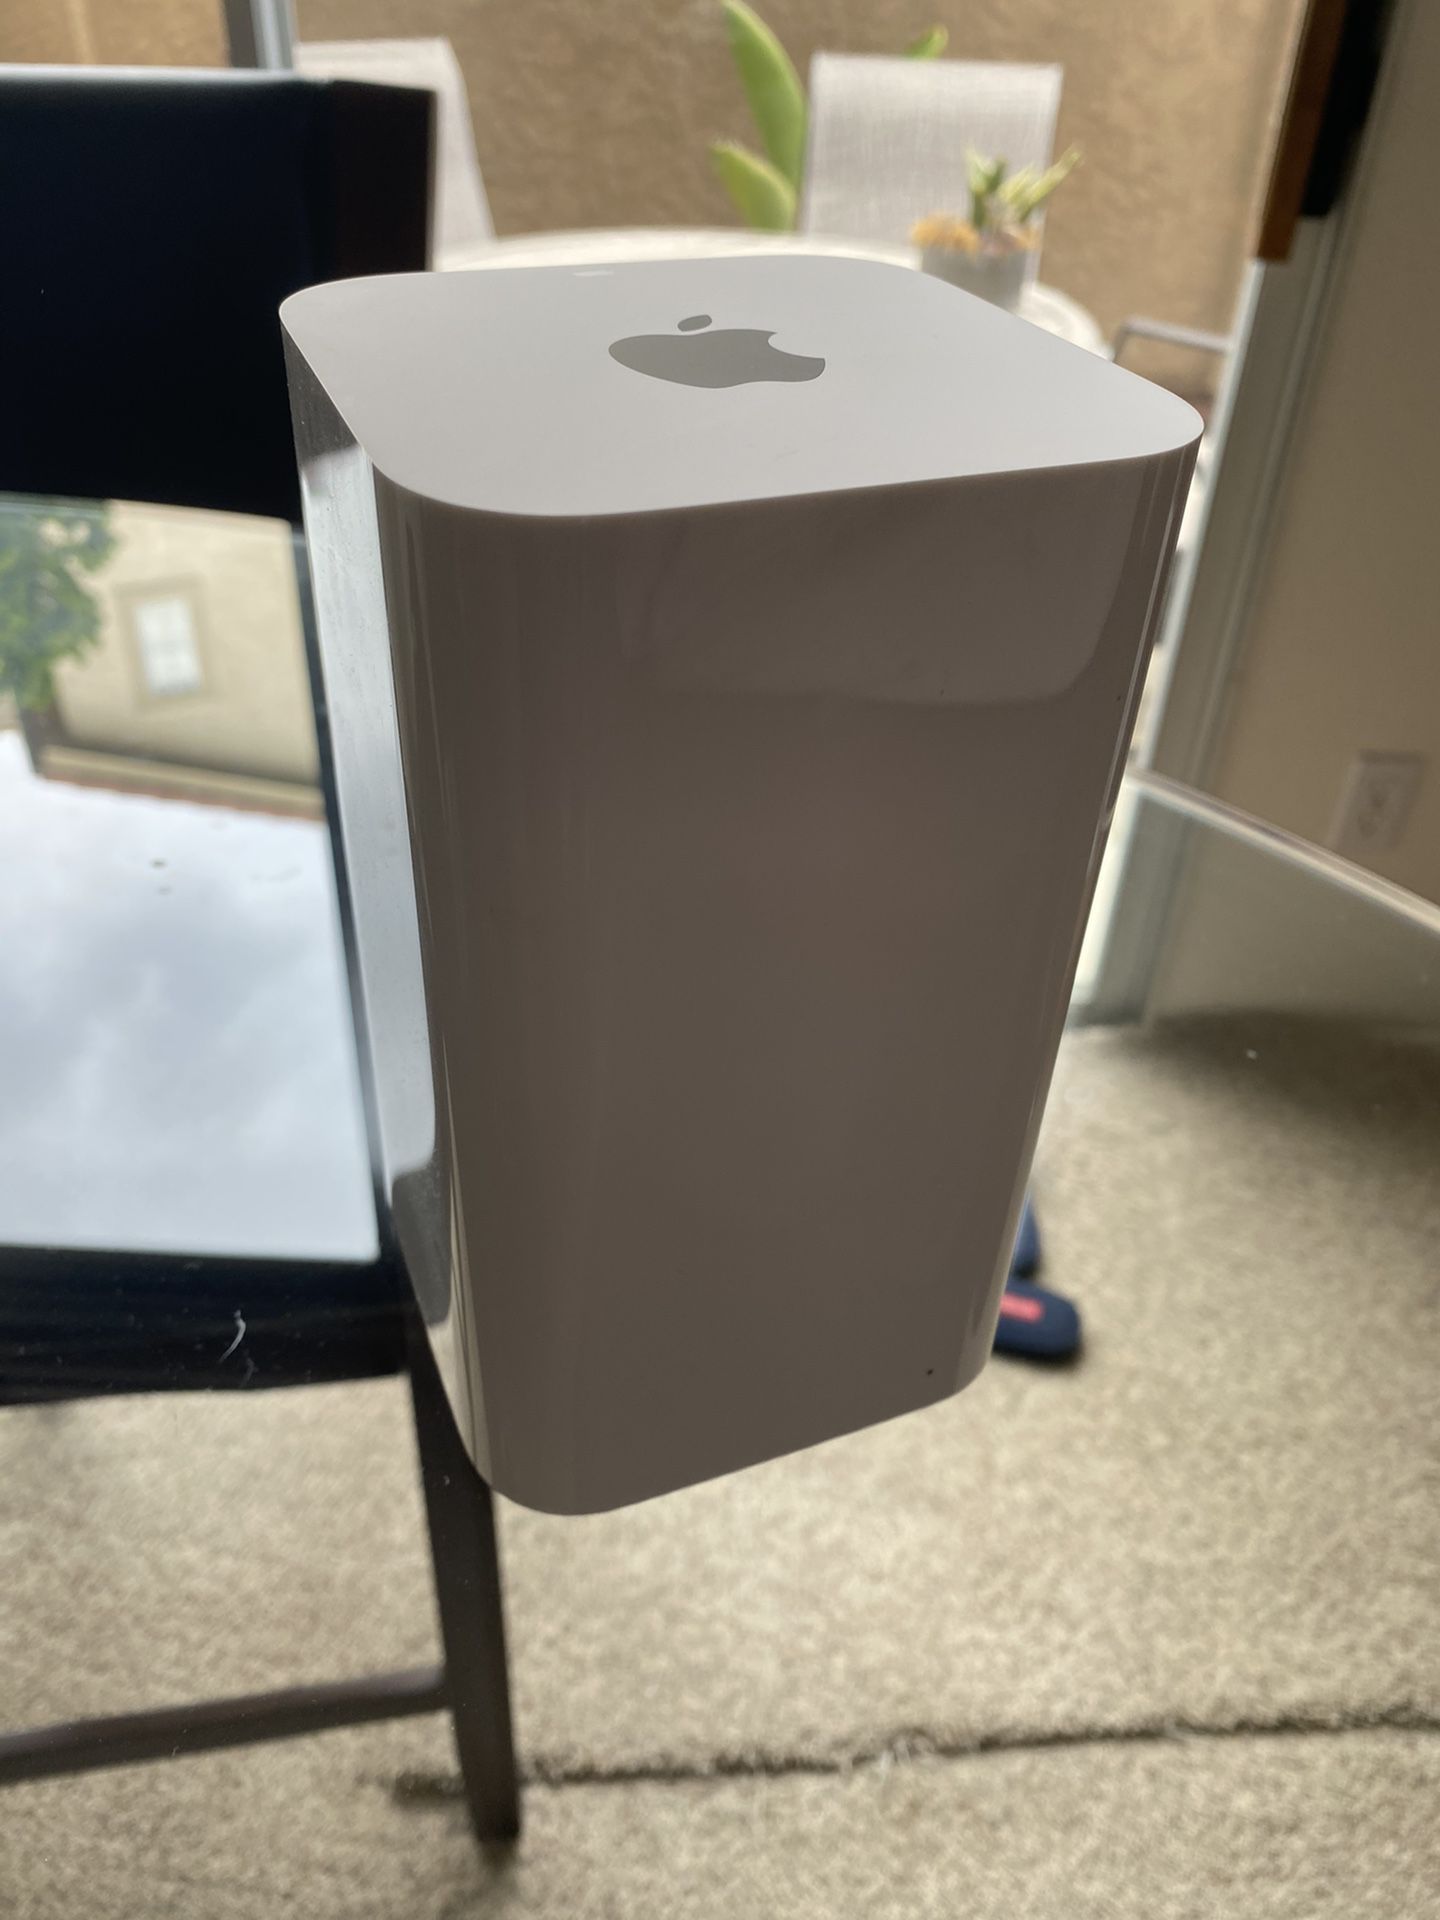 WIFI Router AirPort Extreme Apple